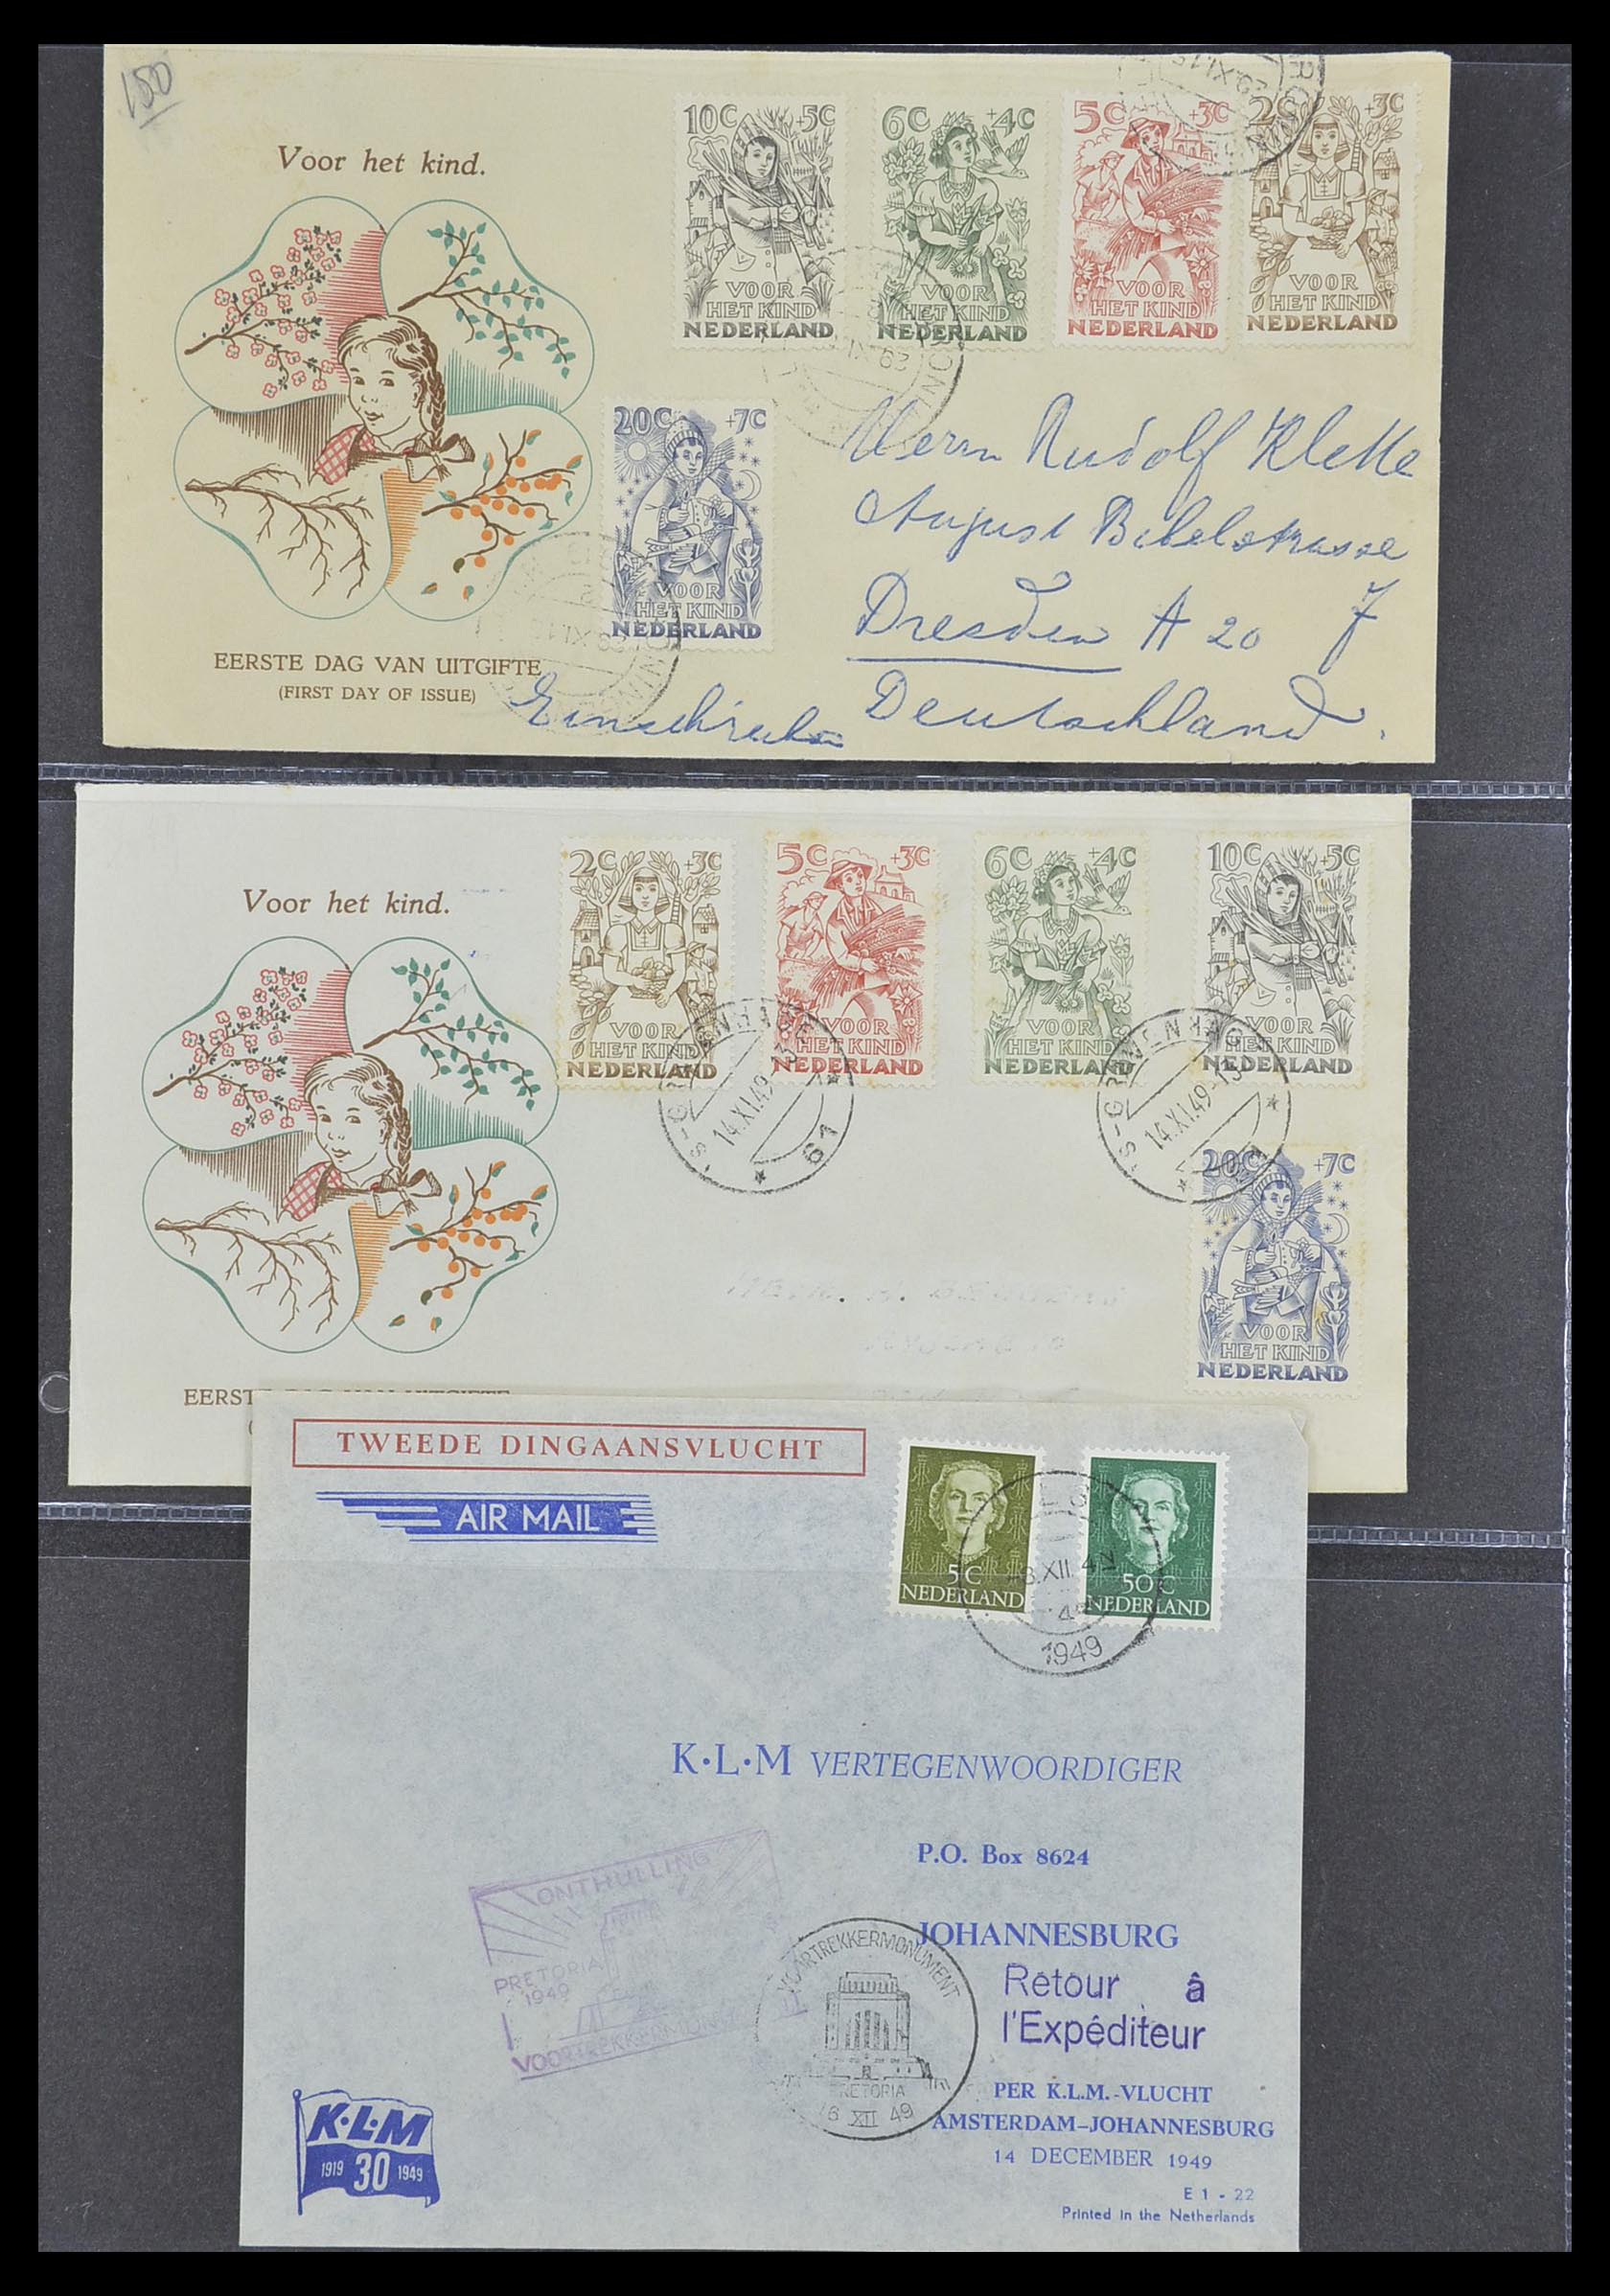 33330 045 - Stamp collection 33330 Netherlands covers 1852-1959.